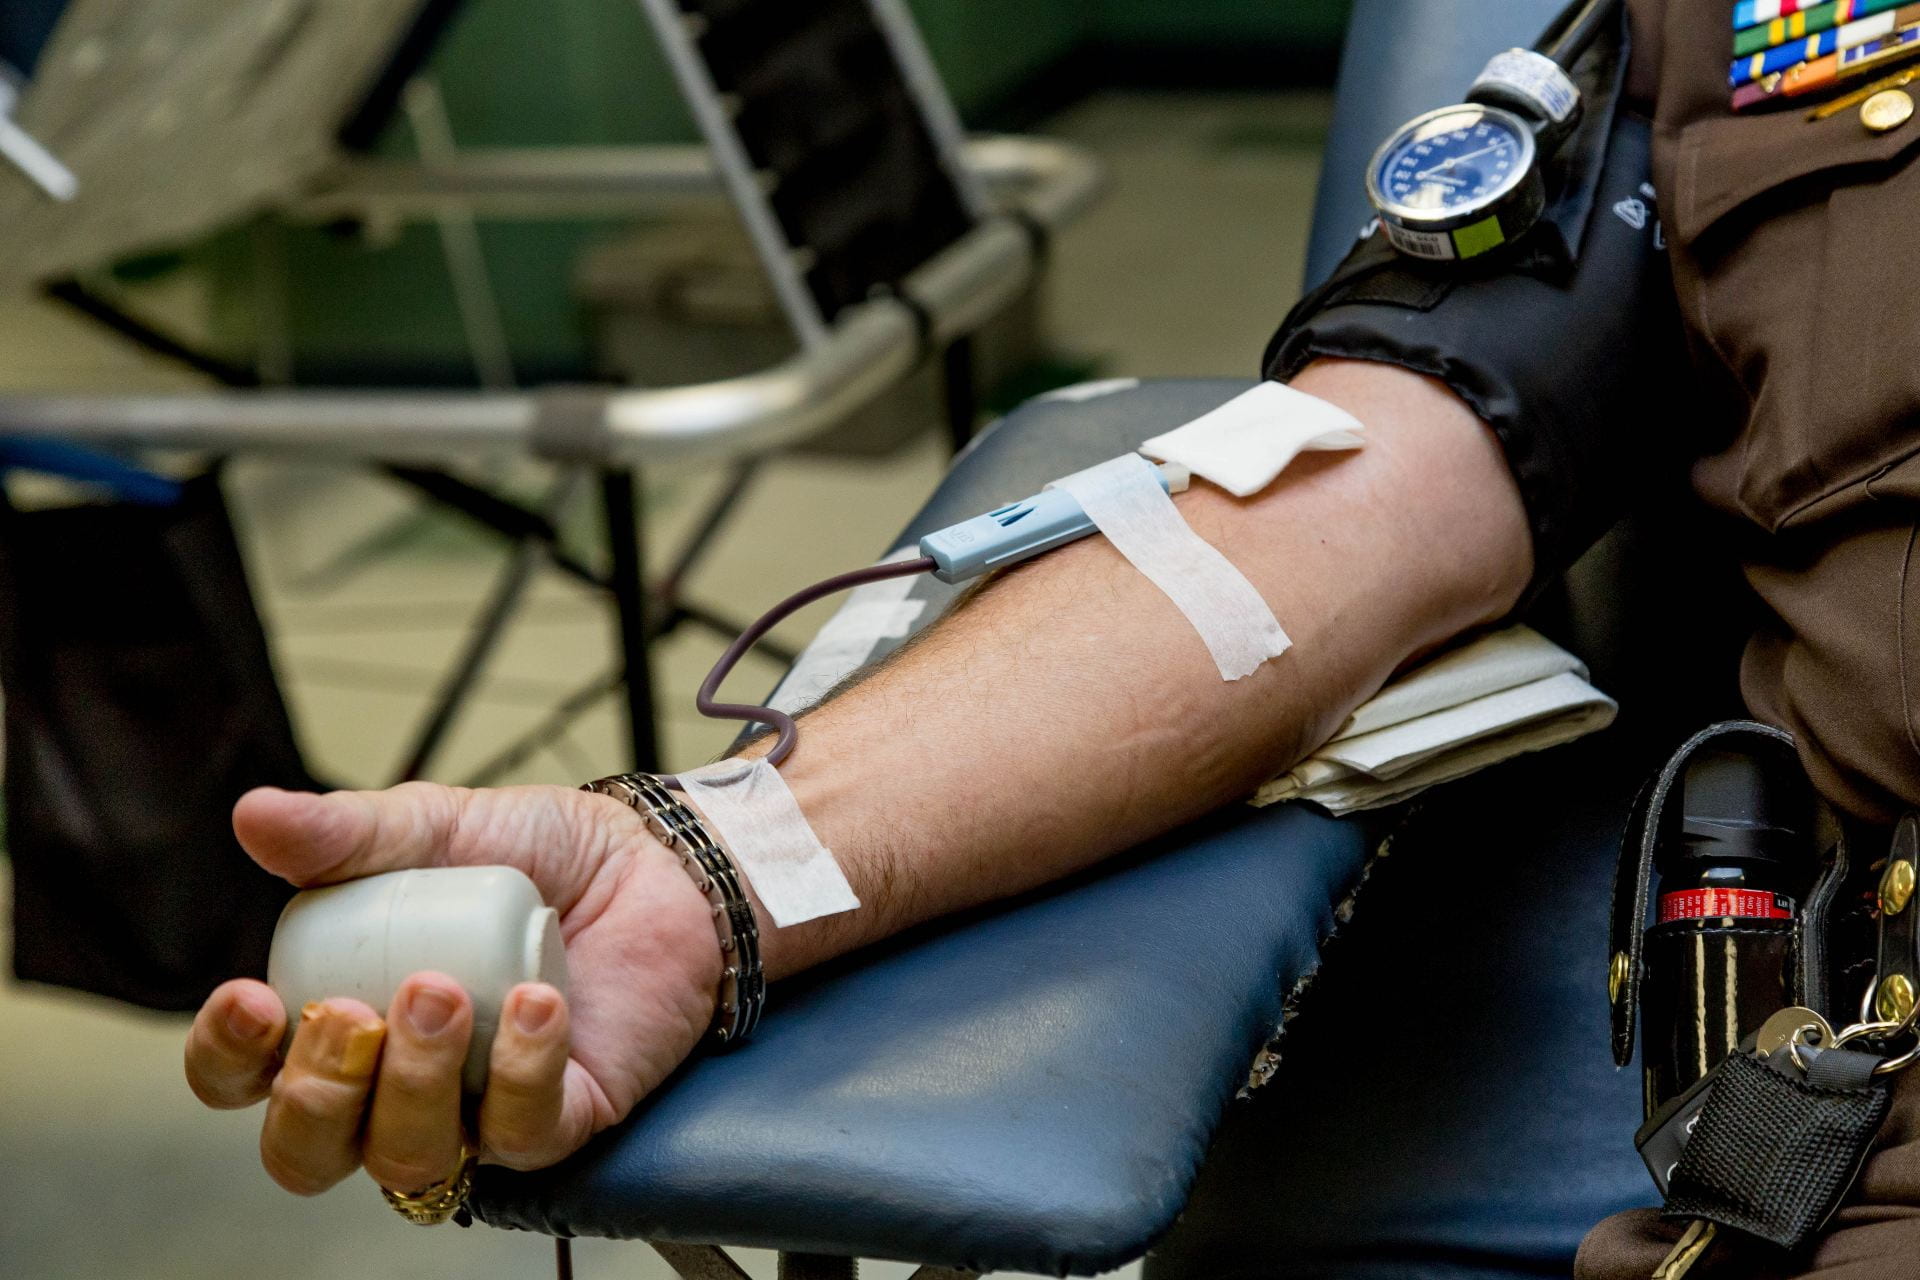 Psychology Applied to Blood Donations